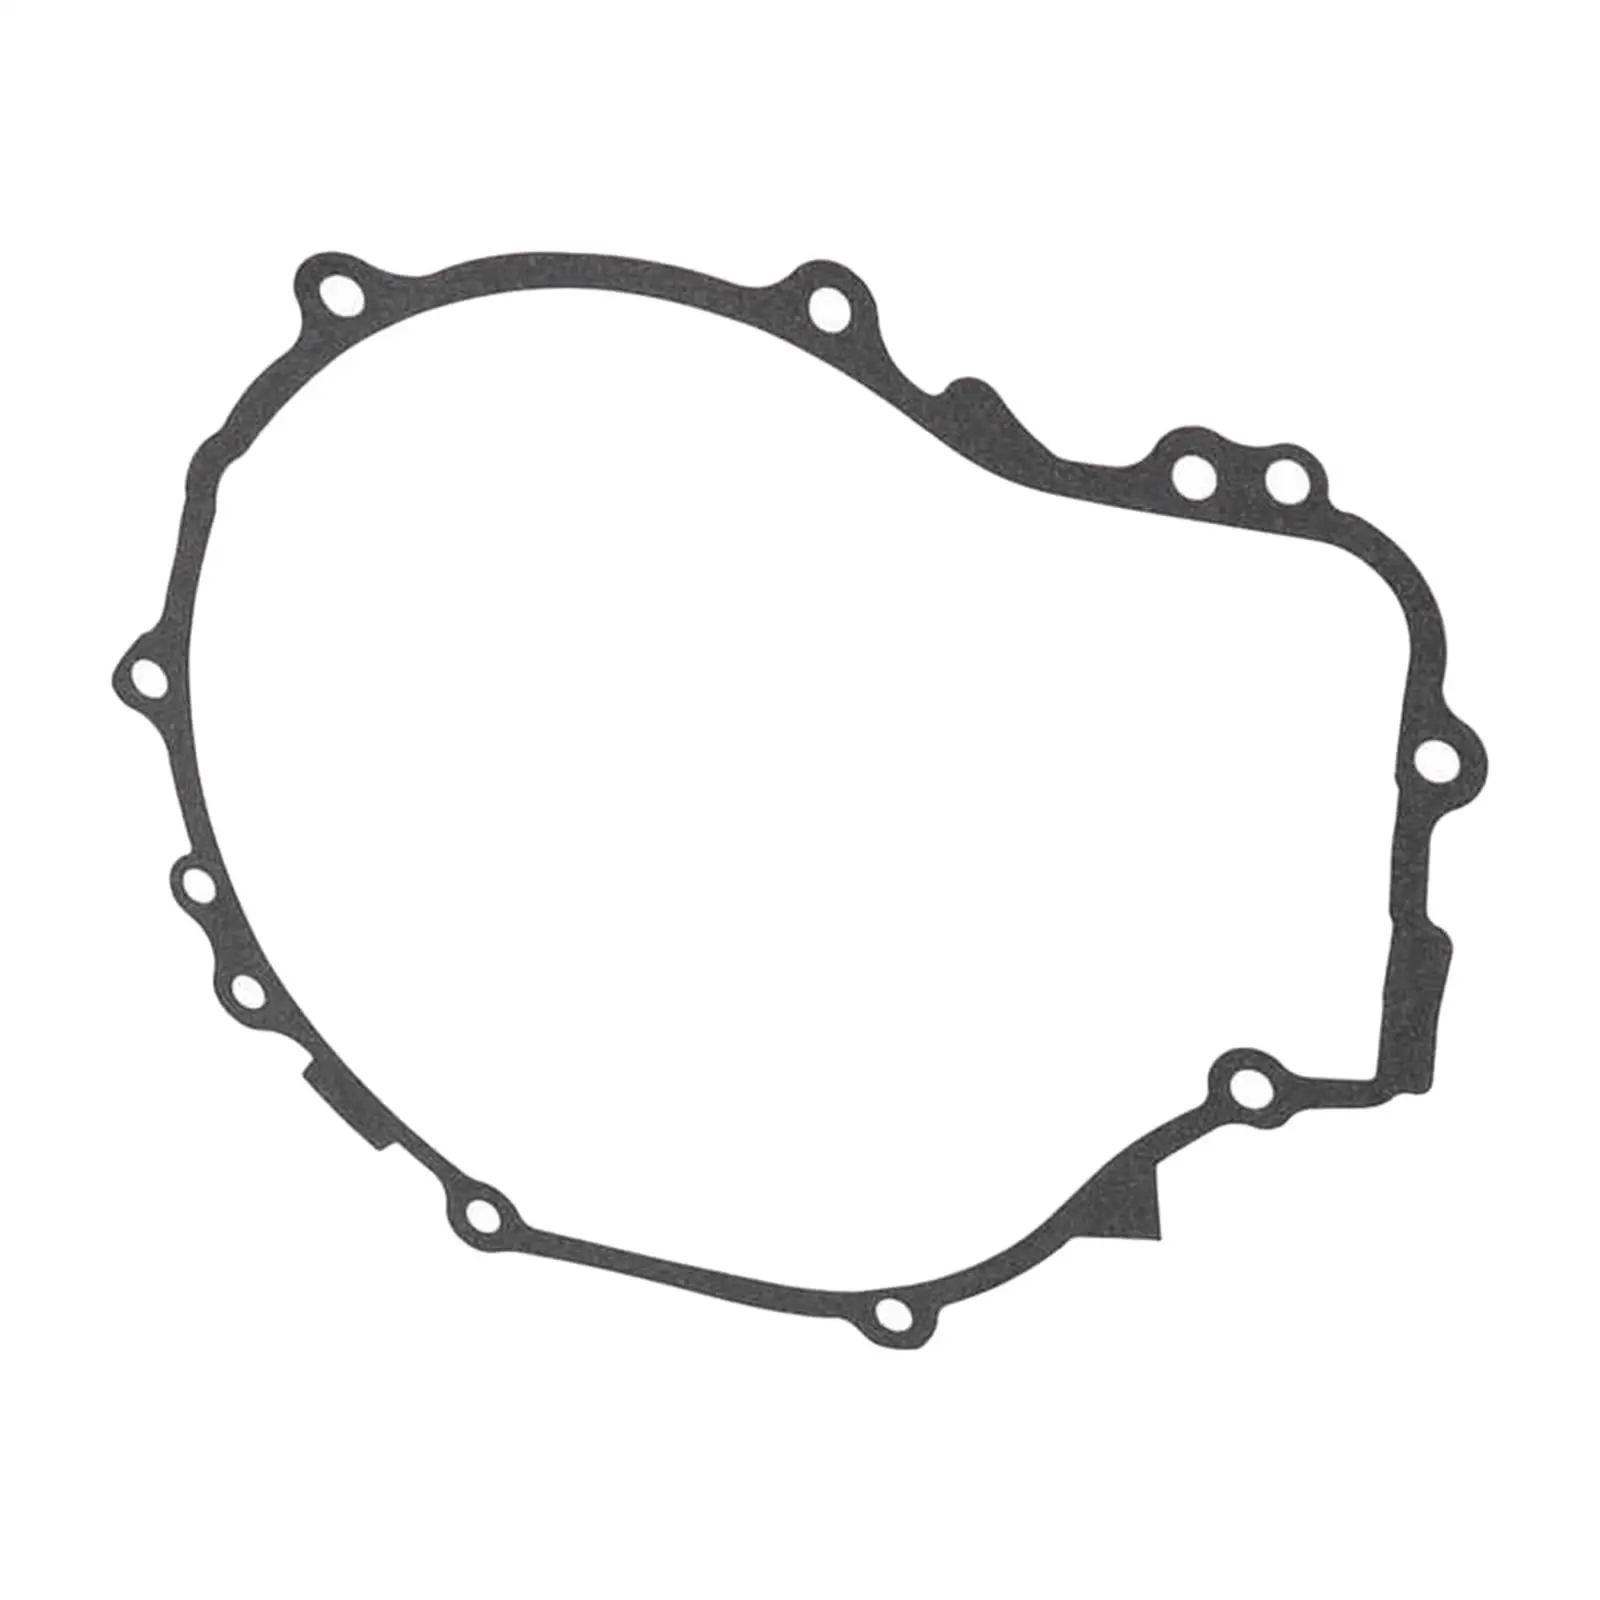 Automotive Pull Start Gasket, 3084933 for Polaris Sportsman 500 Replace Easy